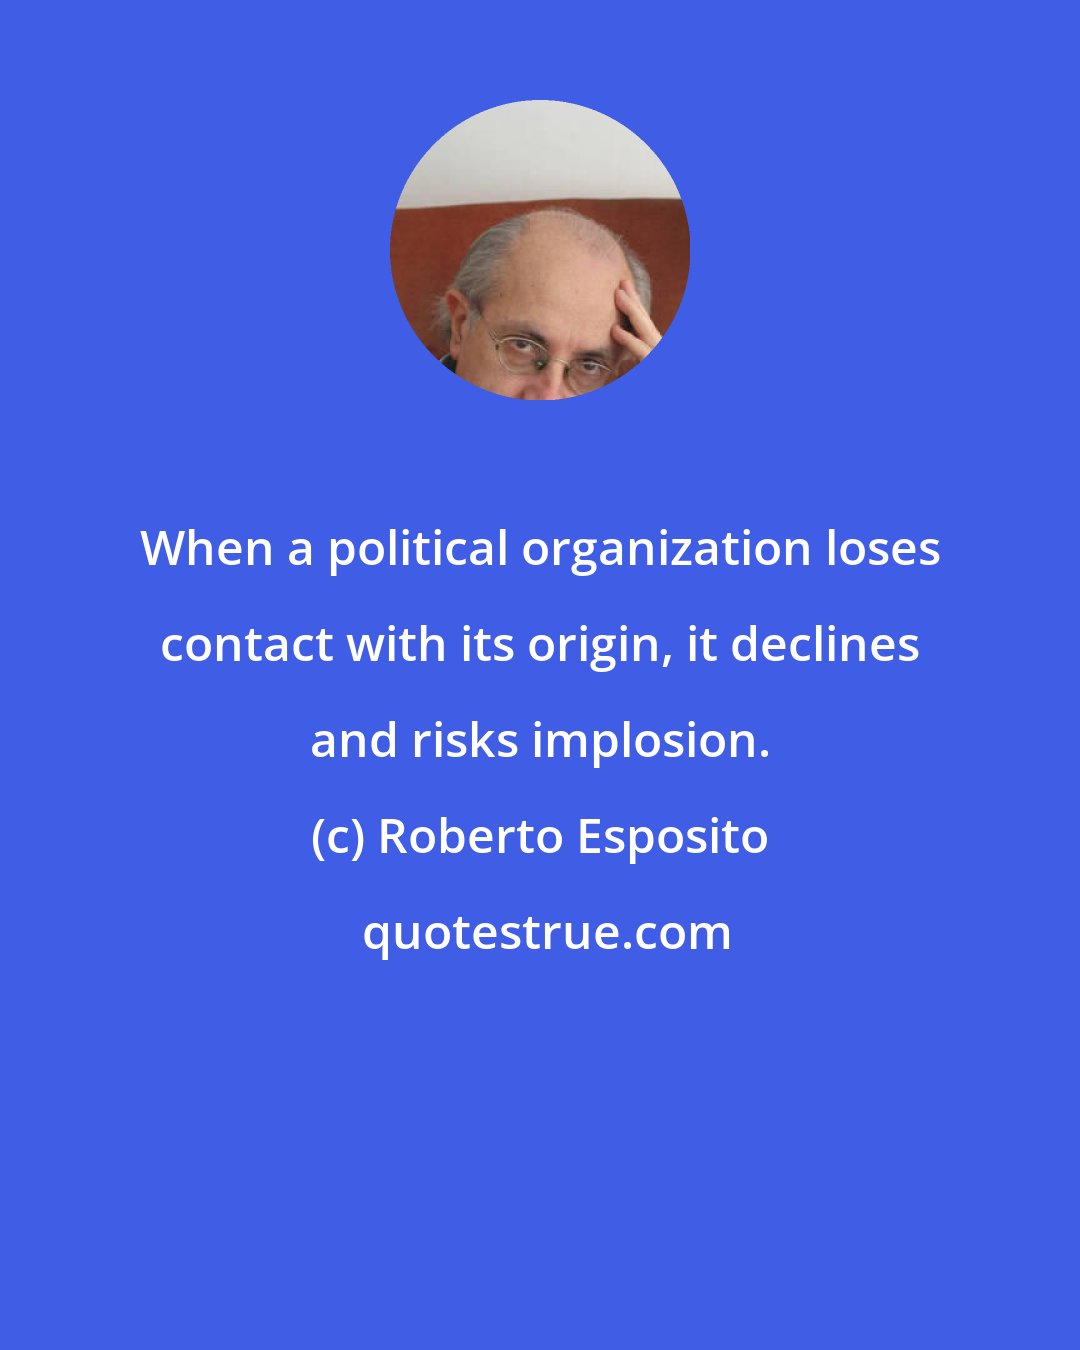 Roberto Esposito: When a political organization loses contact with its origin, it declines and risks implosion.